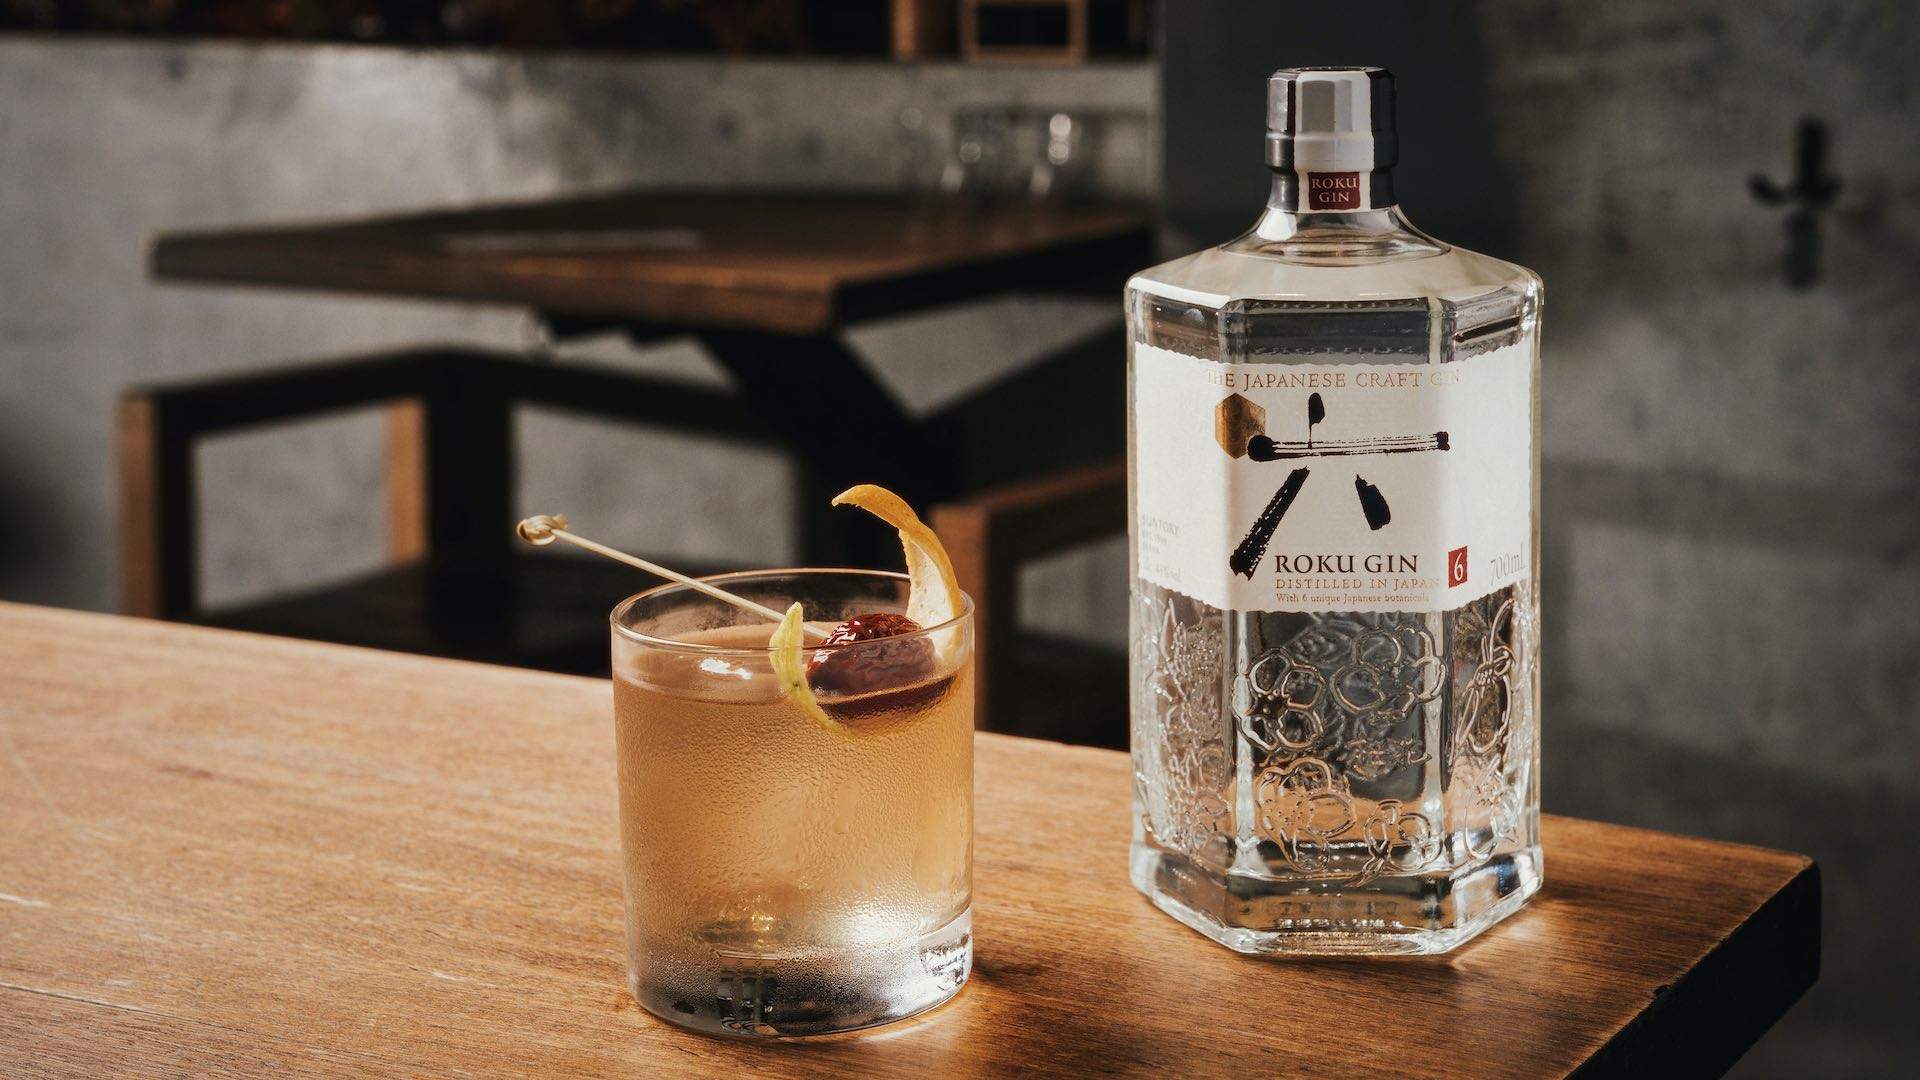 How to Drink, and Pair this Gin - Concrete Playground